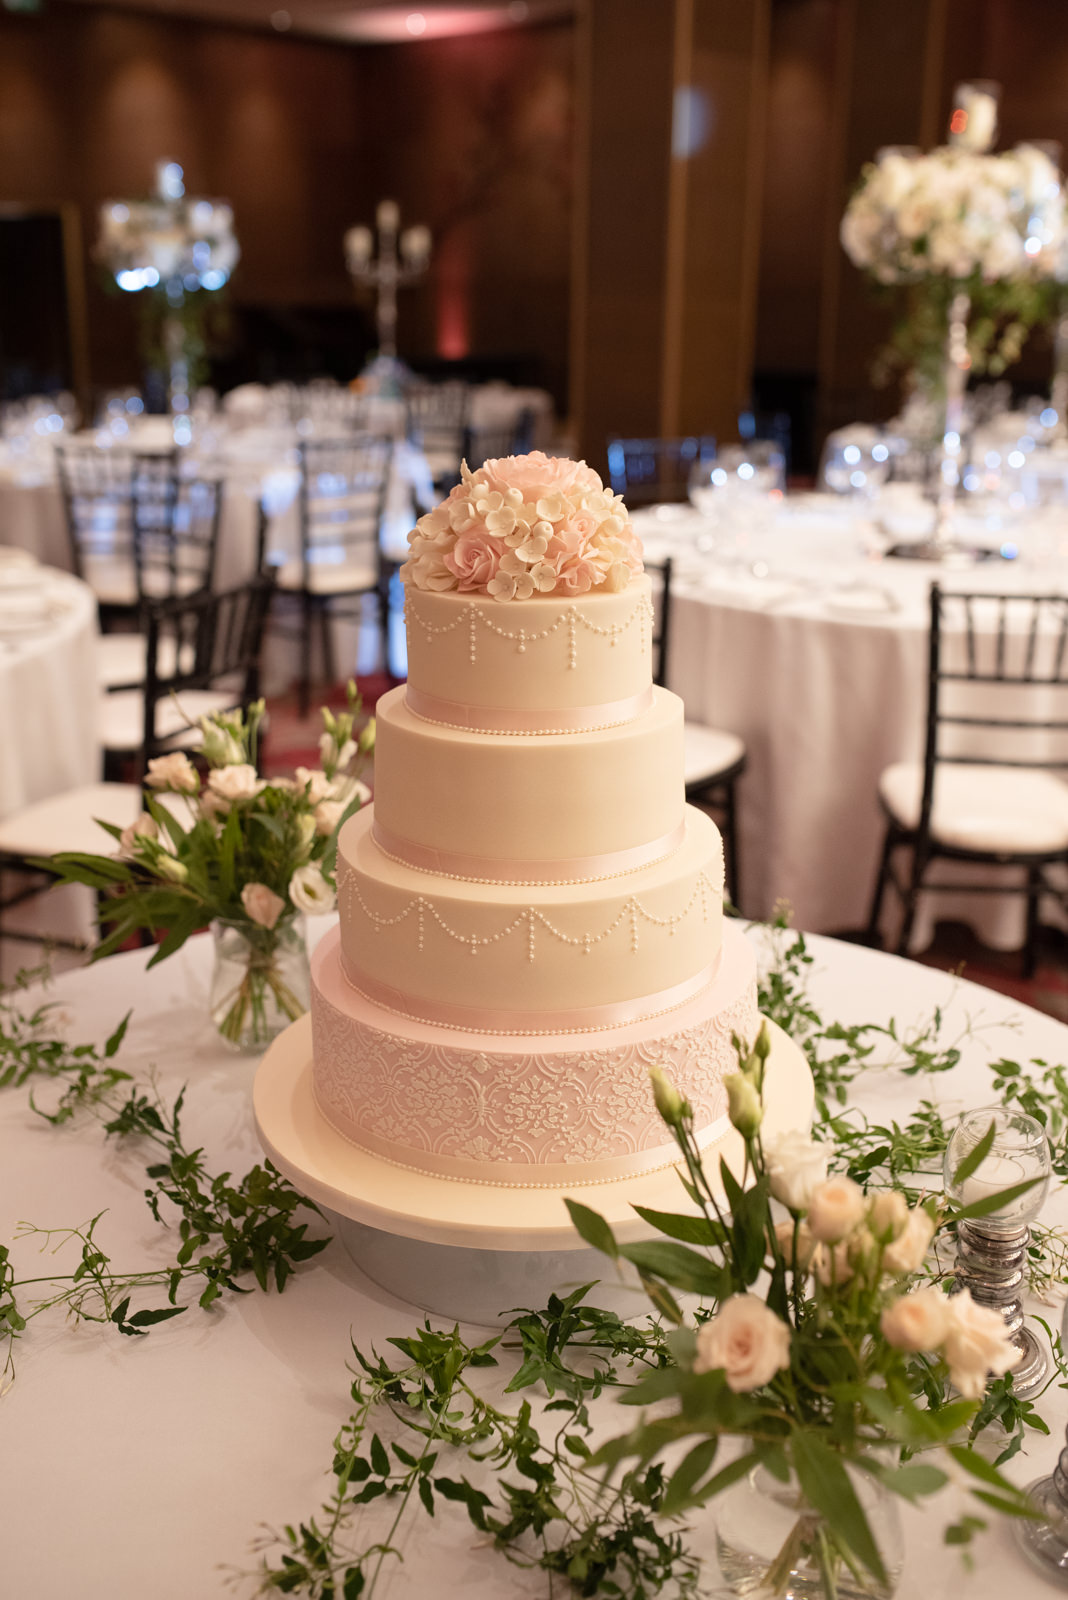 CG Couture pink tired wedding cake.